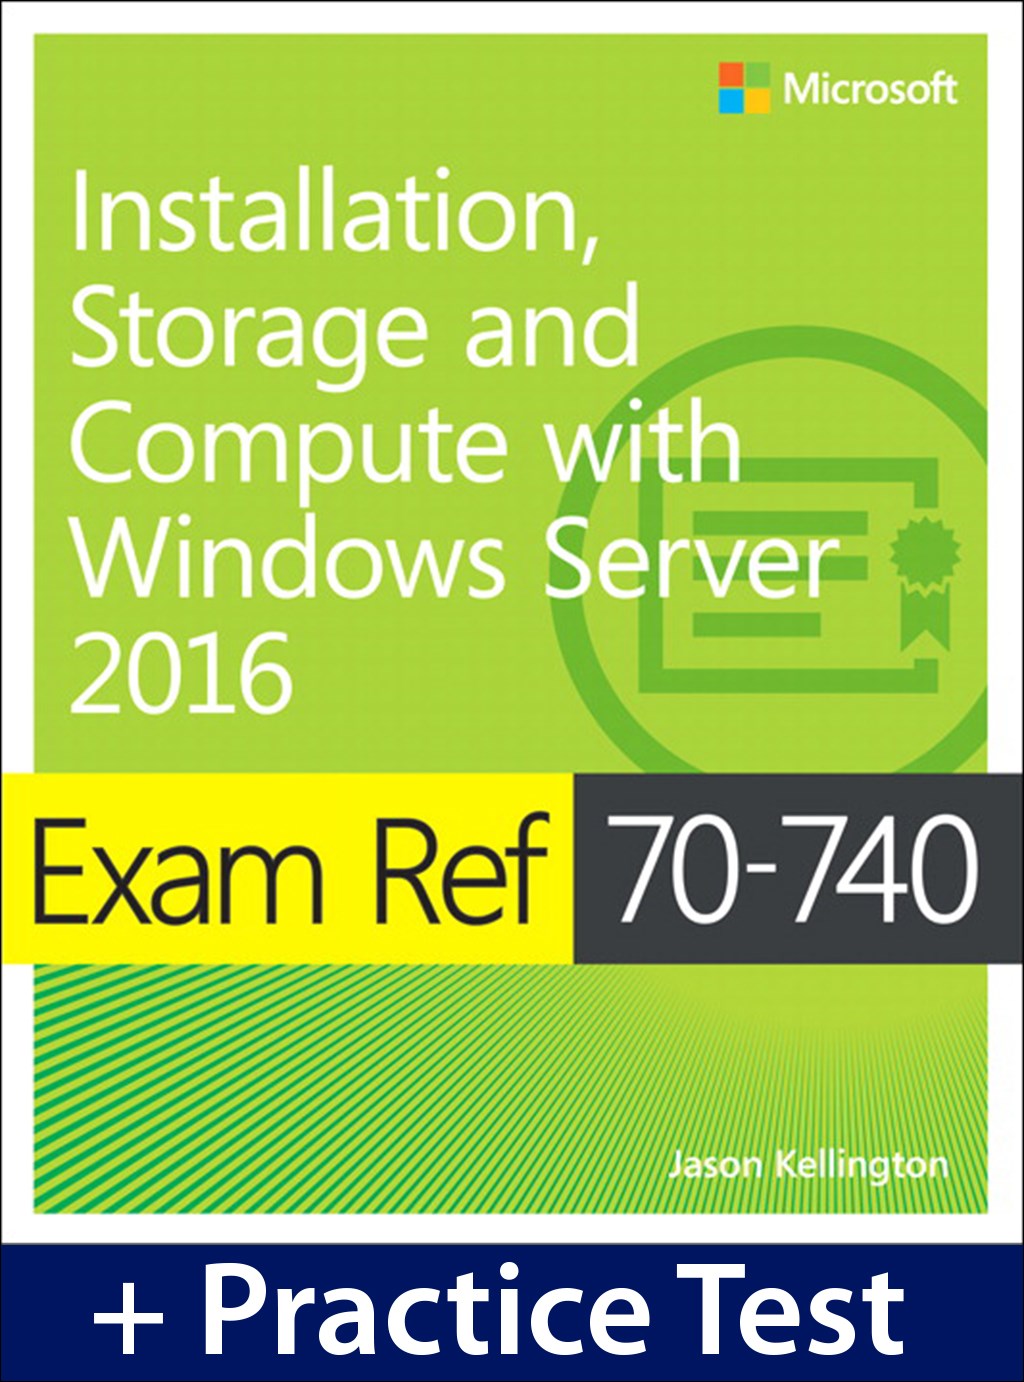 Exam Ref 70-740 Installation, Storage, and Compute with Windows Server 2016 with Practice Test